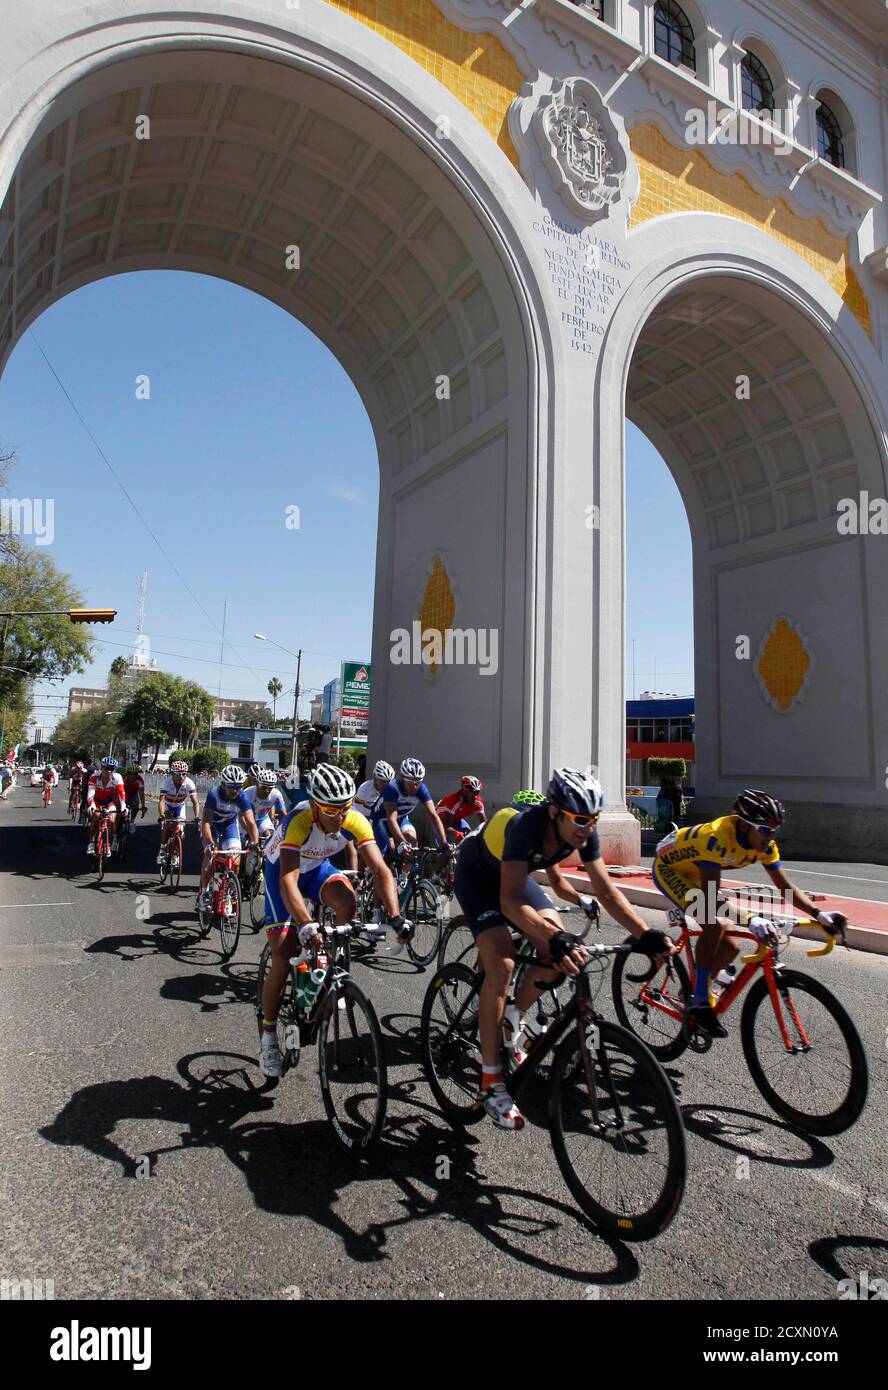 Cyclists compete in the men's road race cycling competition at the Pan American Games in Guadalajara, October 22, 2011.   REUTERS/Jose Miguel Gomez    (MEXICO - Tags: SPORT CYCLING) Stock Photo